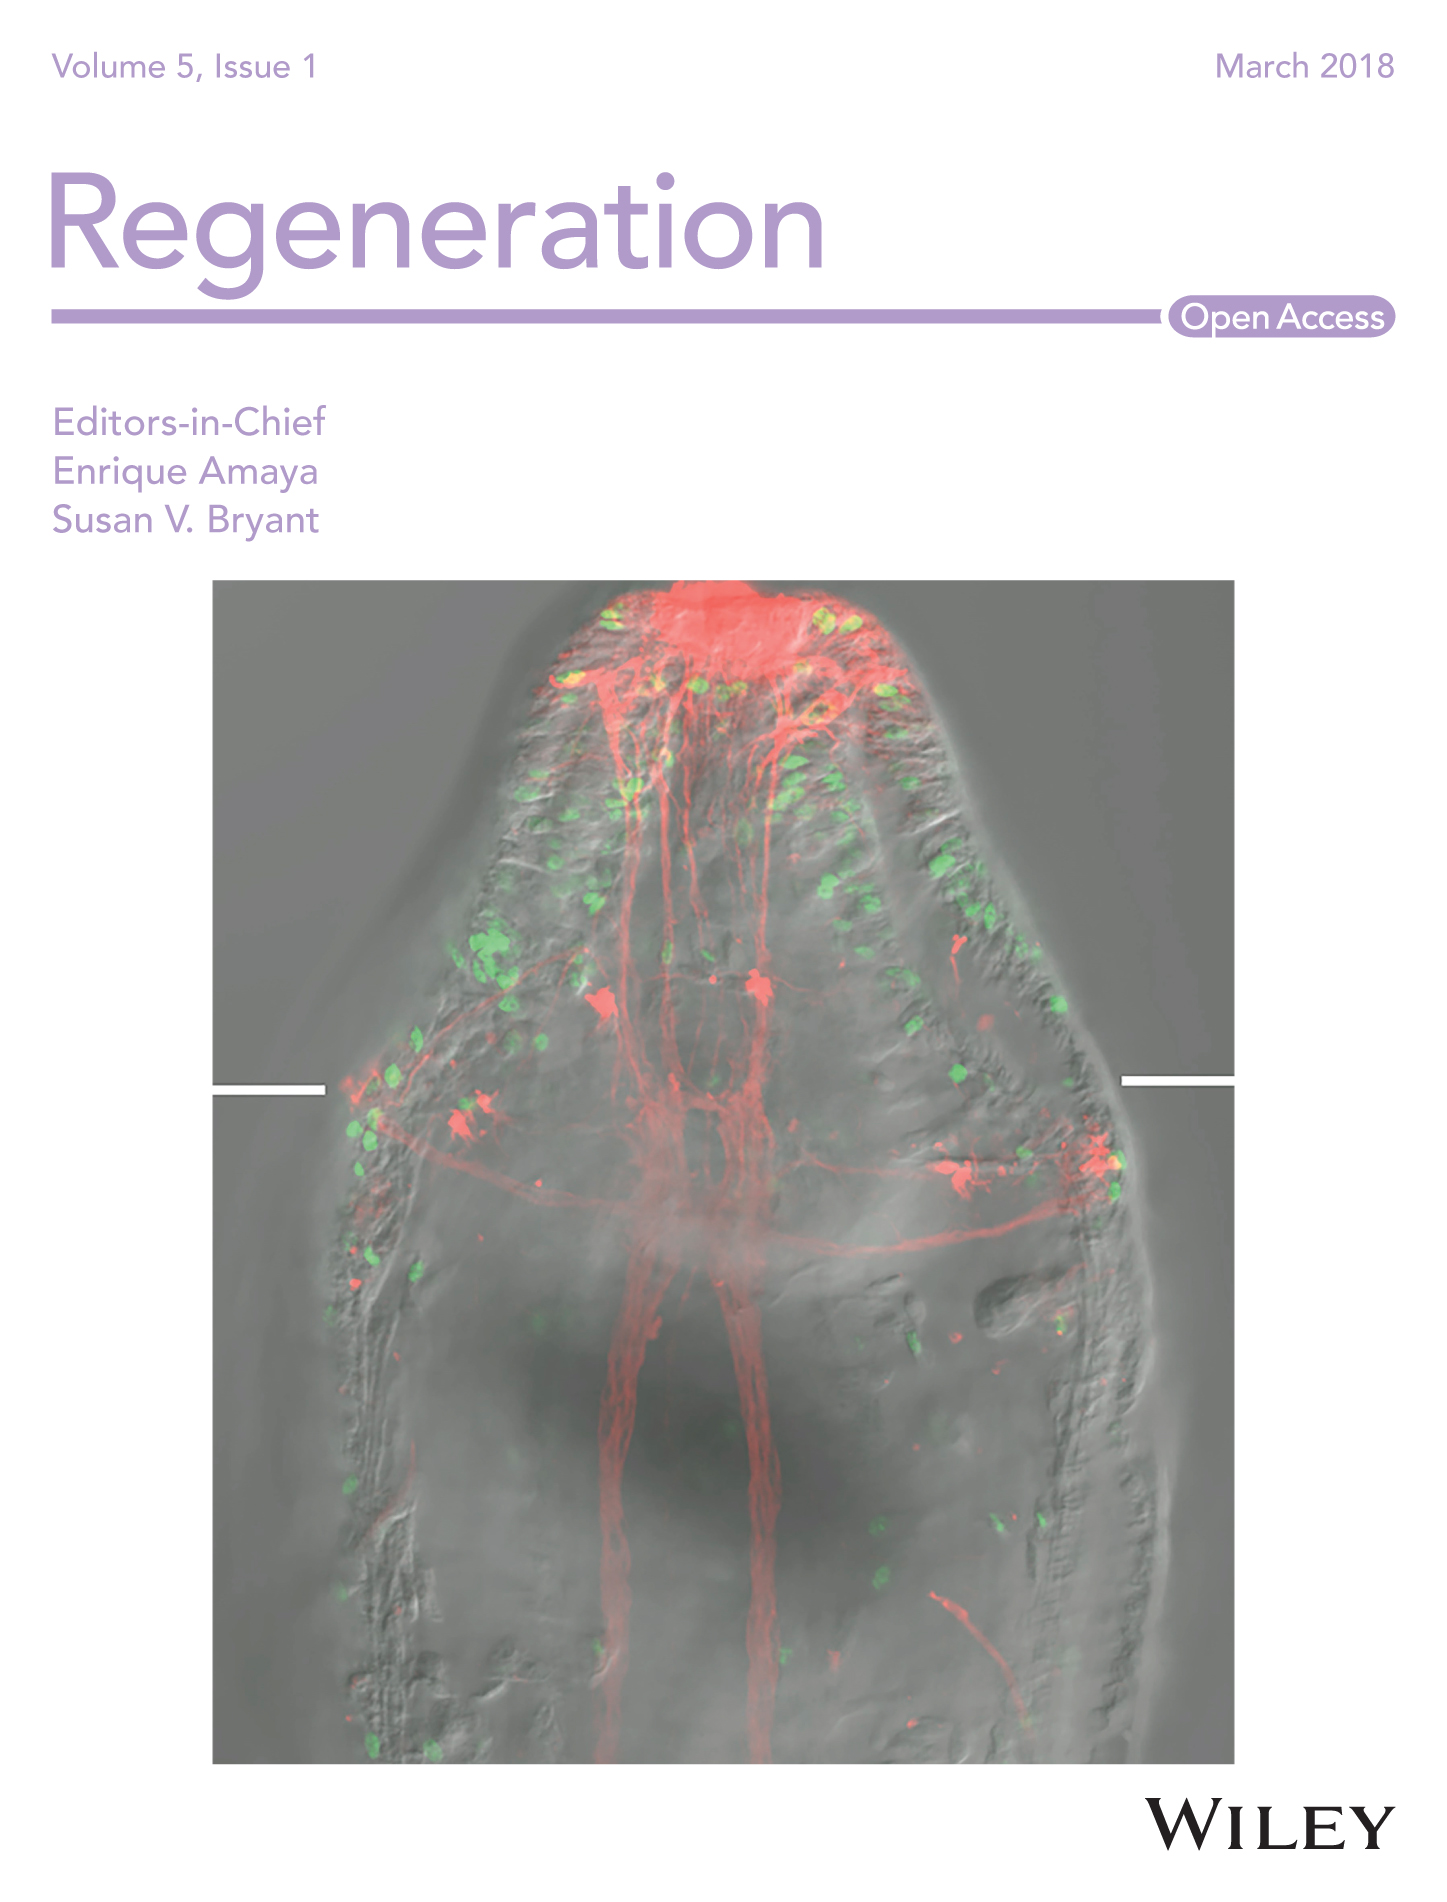 Seaver Lab Article Featured on Cover of Regeneration